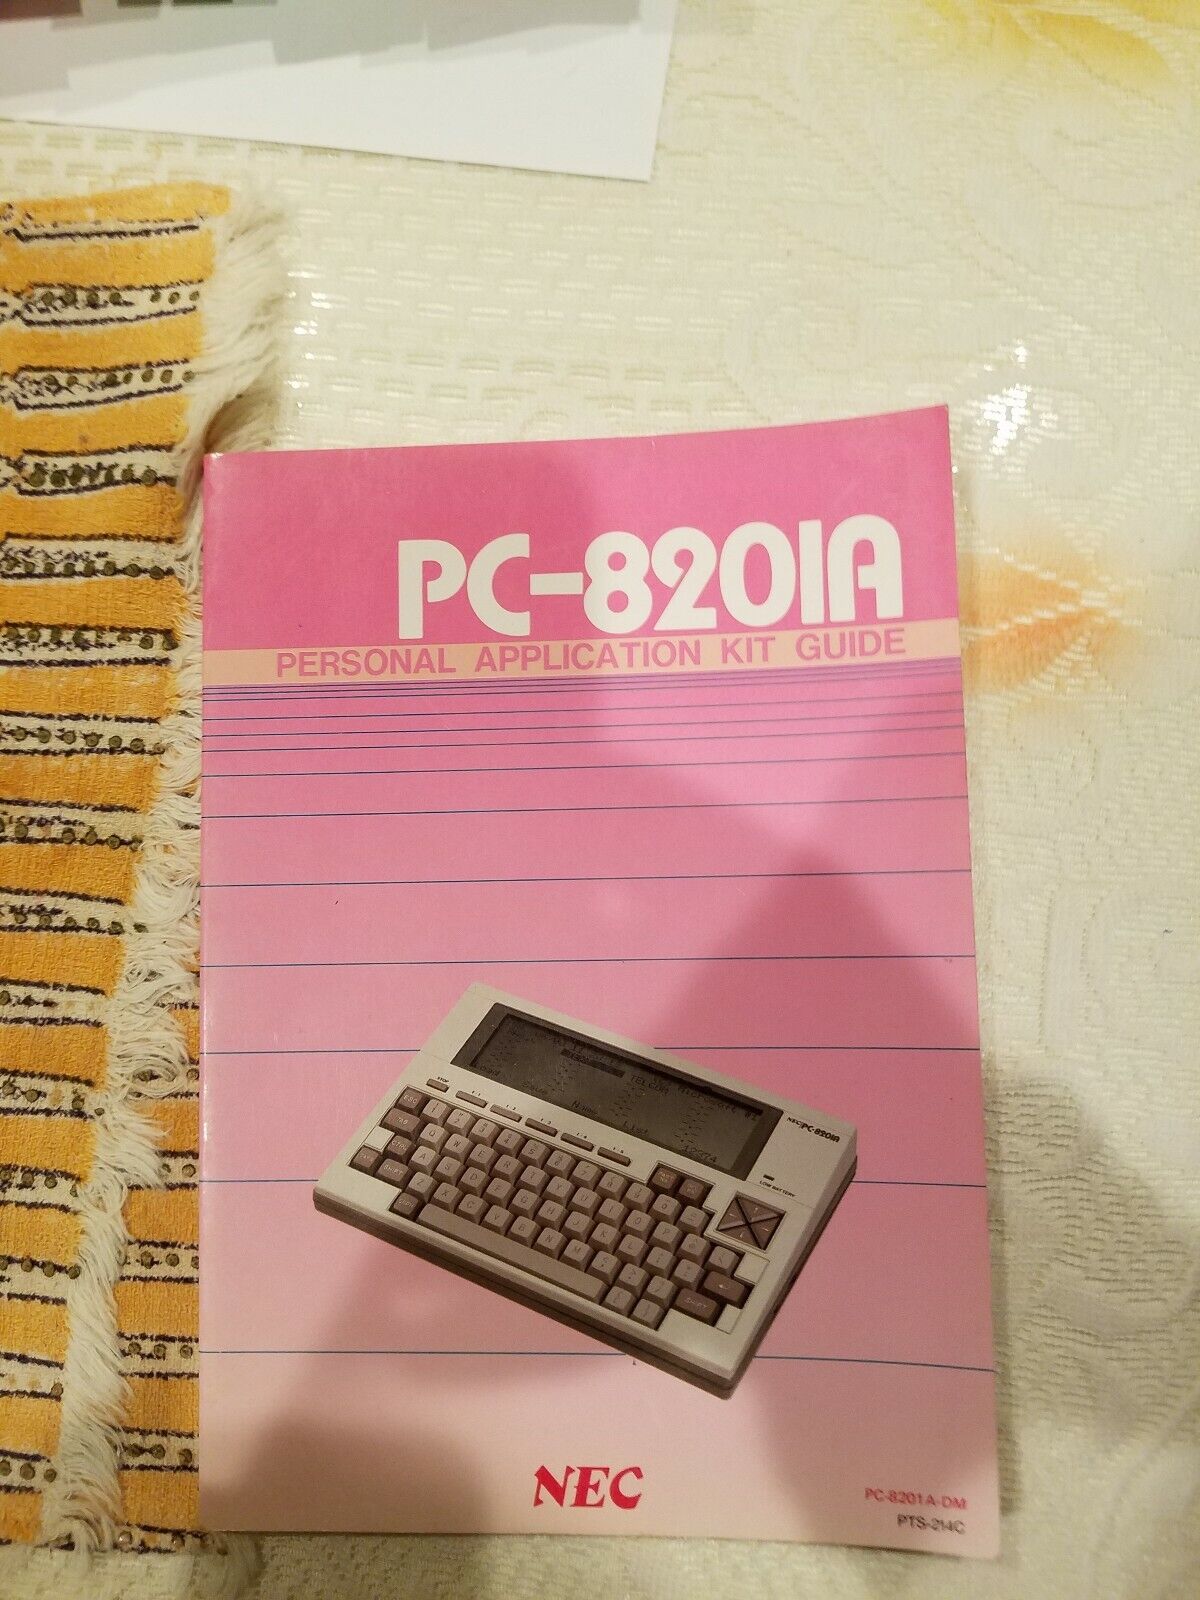 Pc- 820ia Personal Application Kit Guide